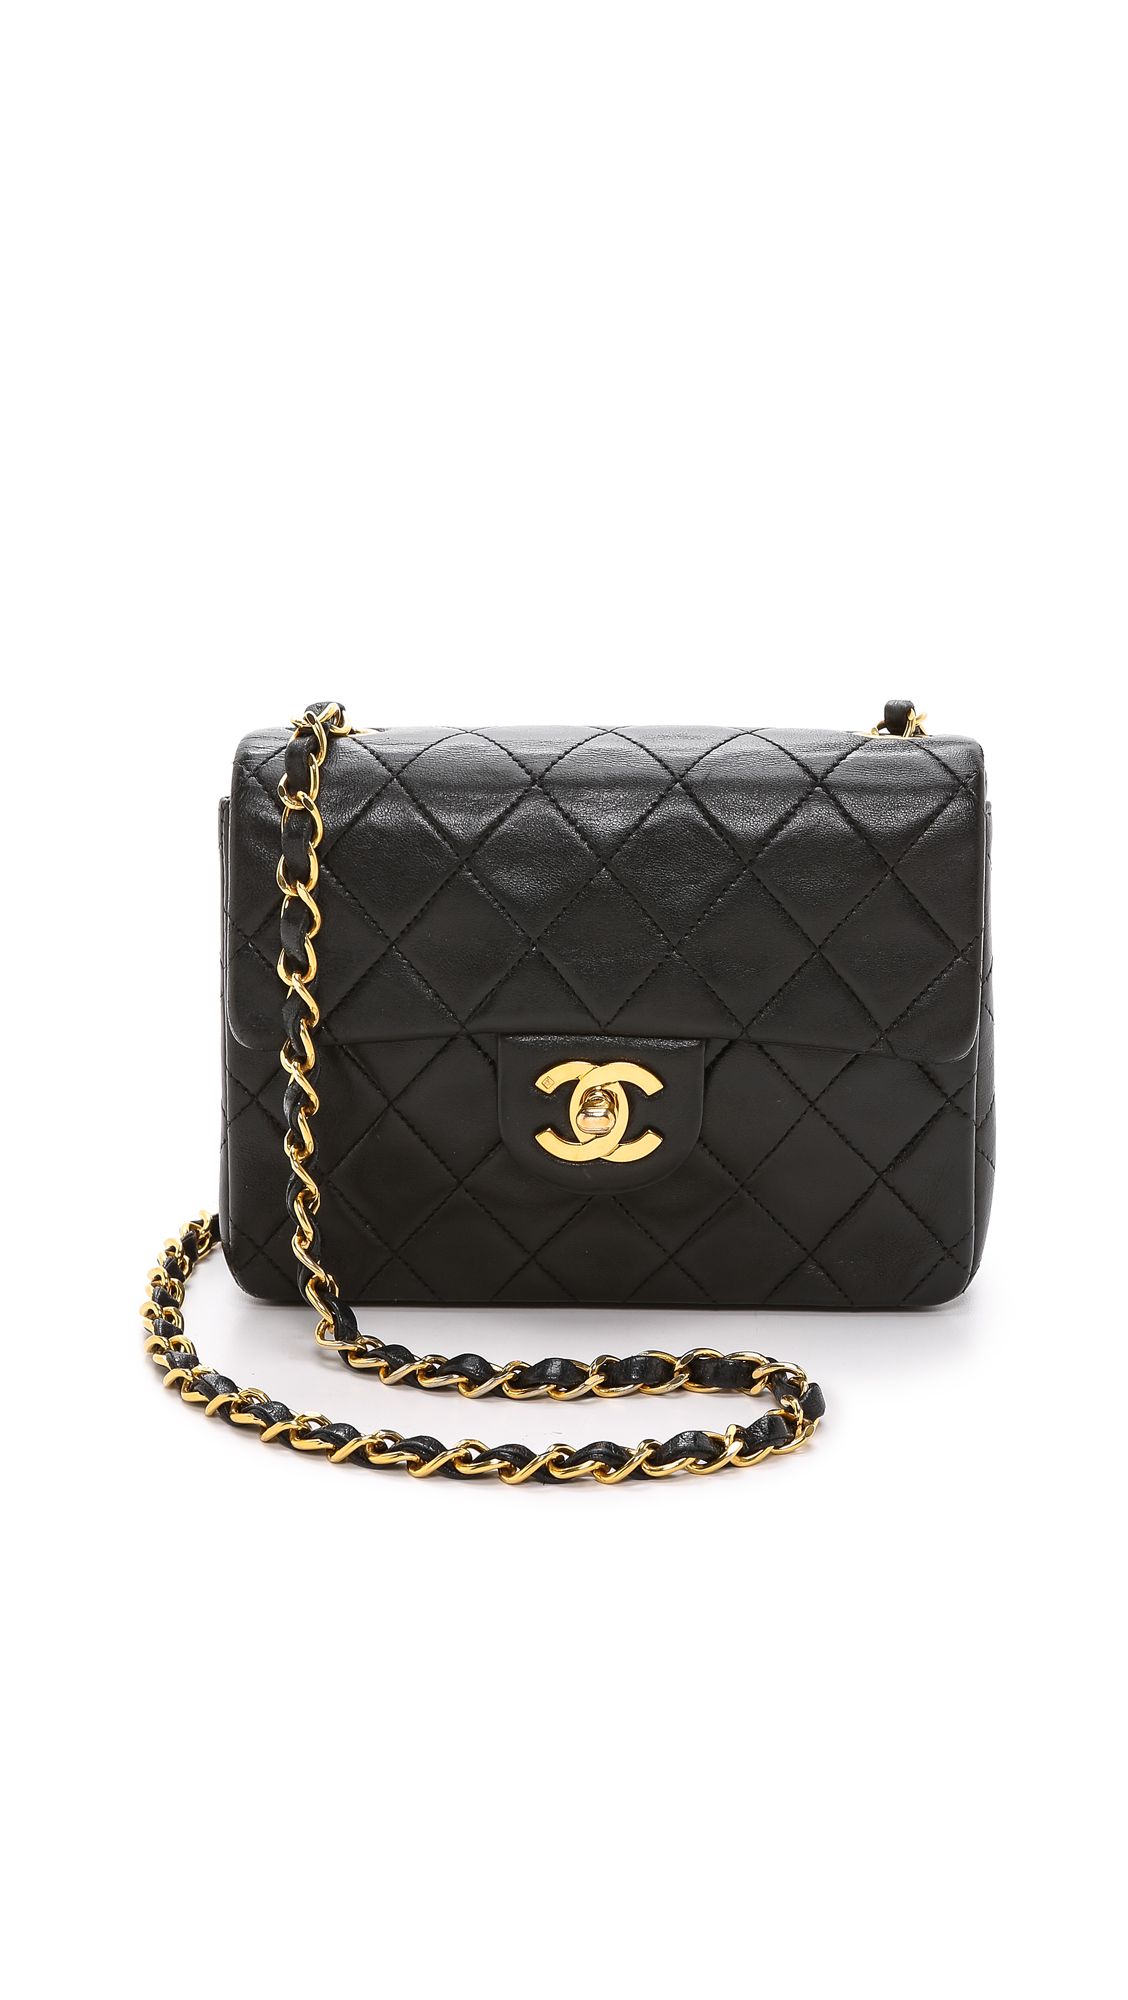 What Goes Around Comes Around Chanel Mini Flap Bag (Previously Owned) - Black | Shopbop